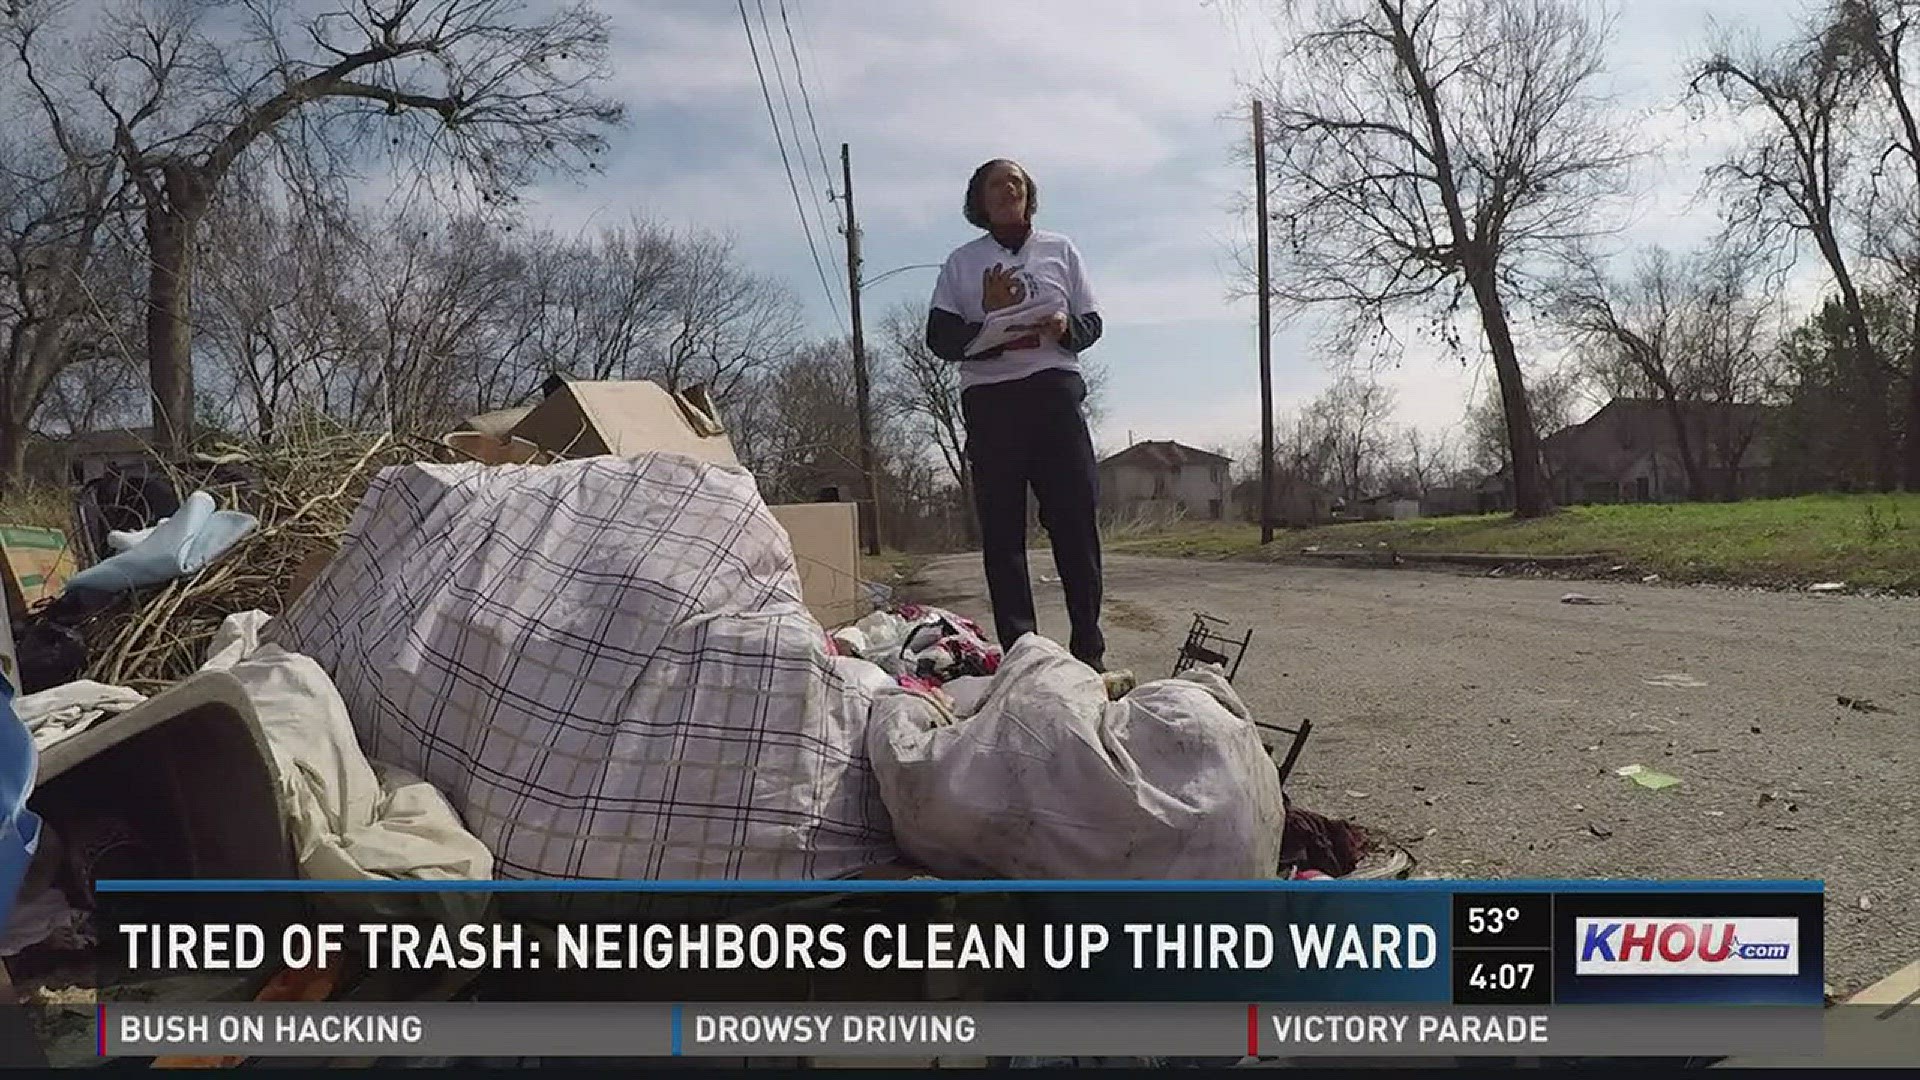 Neighbors in the Third Ward are sick and tired of trash being dumped on their streets so they're banding together to do something about it.